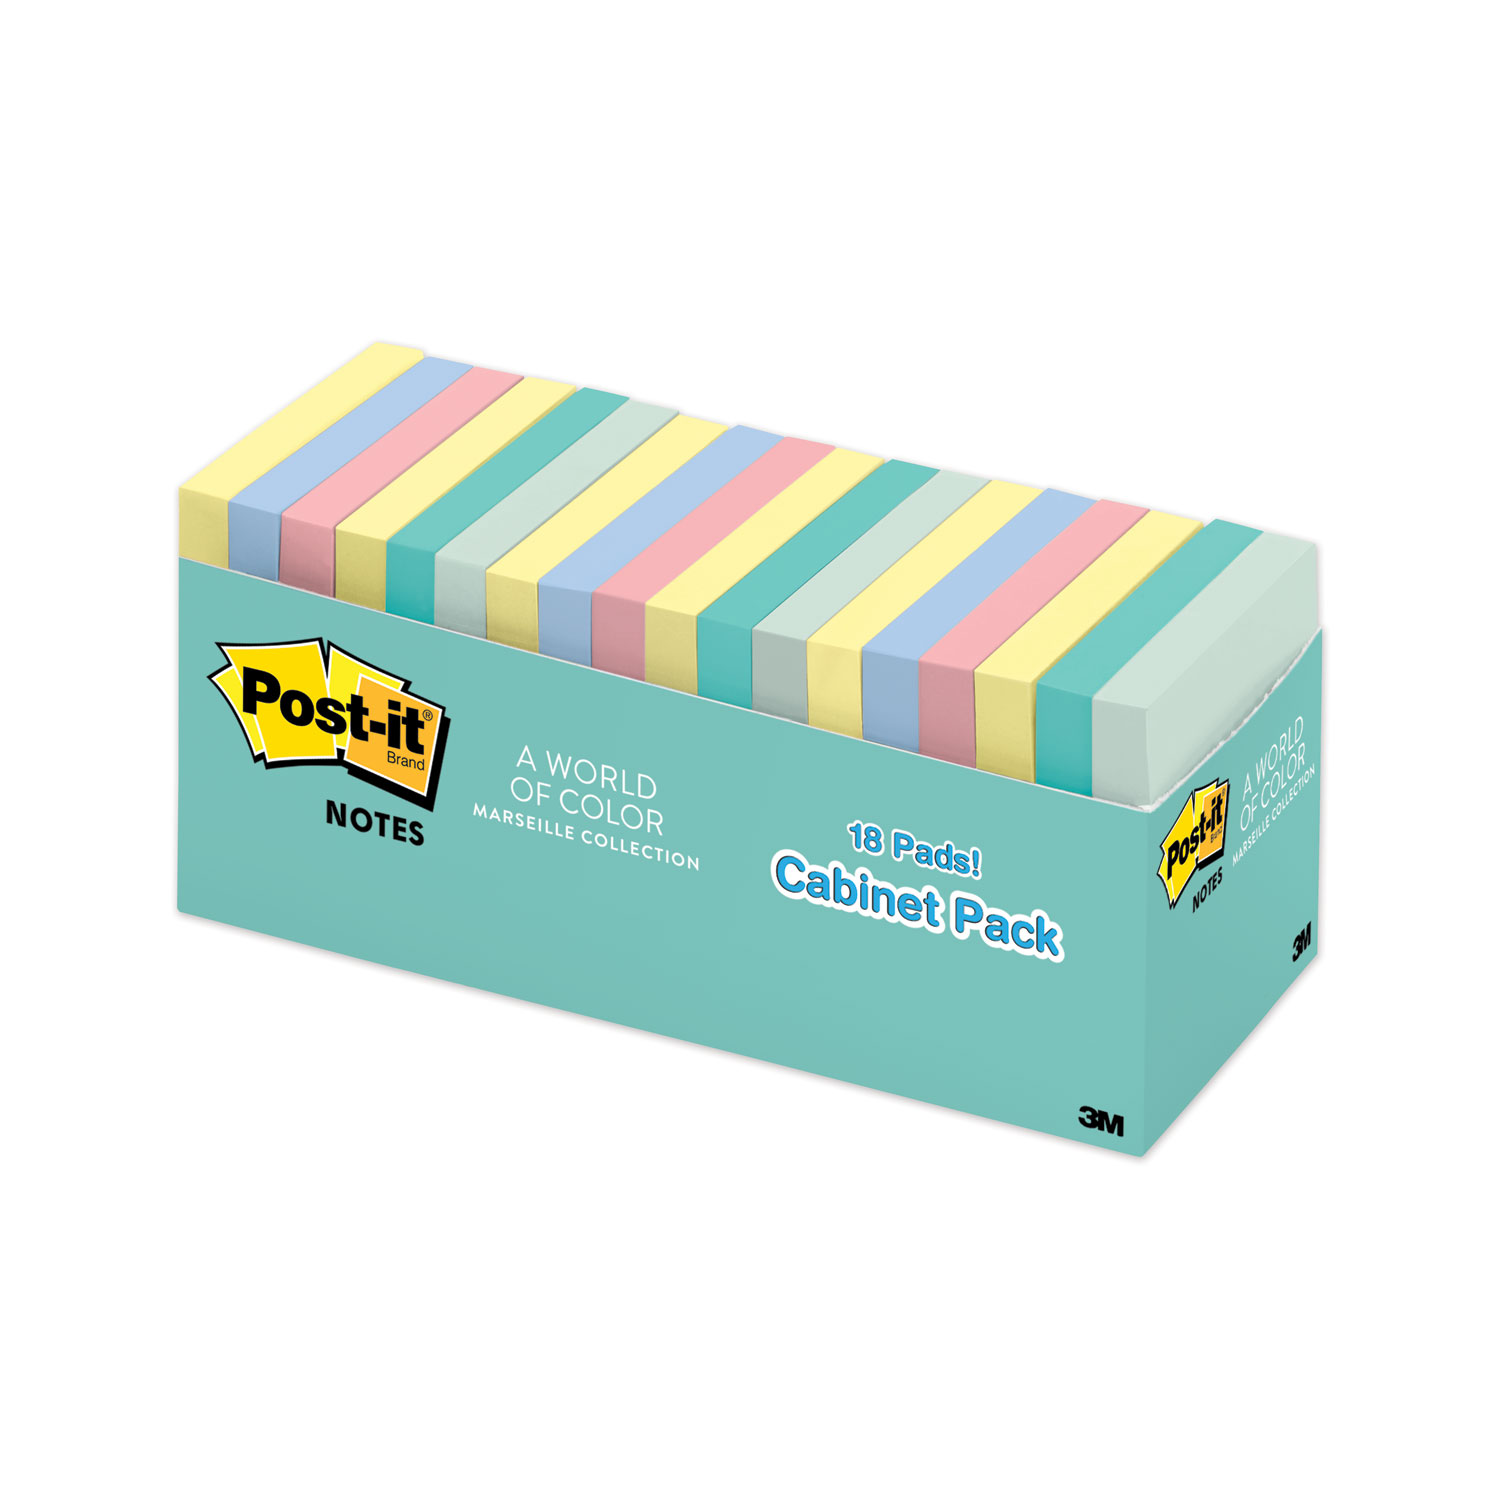  Post-it Notes MMM65418APCP Original Pads in Marseille Colors, Cabinet Pack, 3 x 3, 100 Sheets/Pad, 18 Pads/Pack (MMM2715743) 